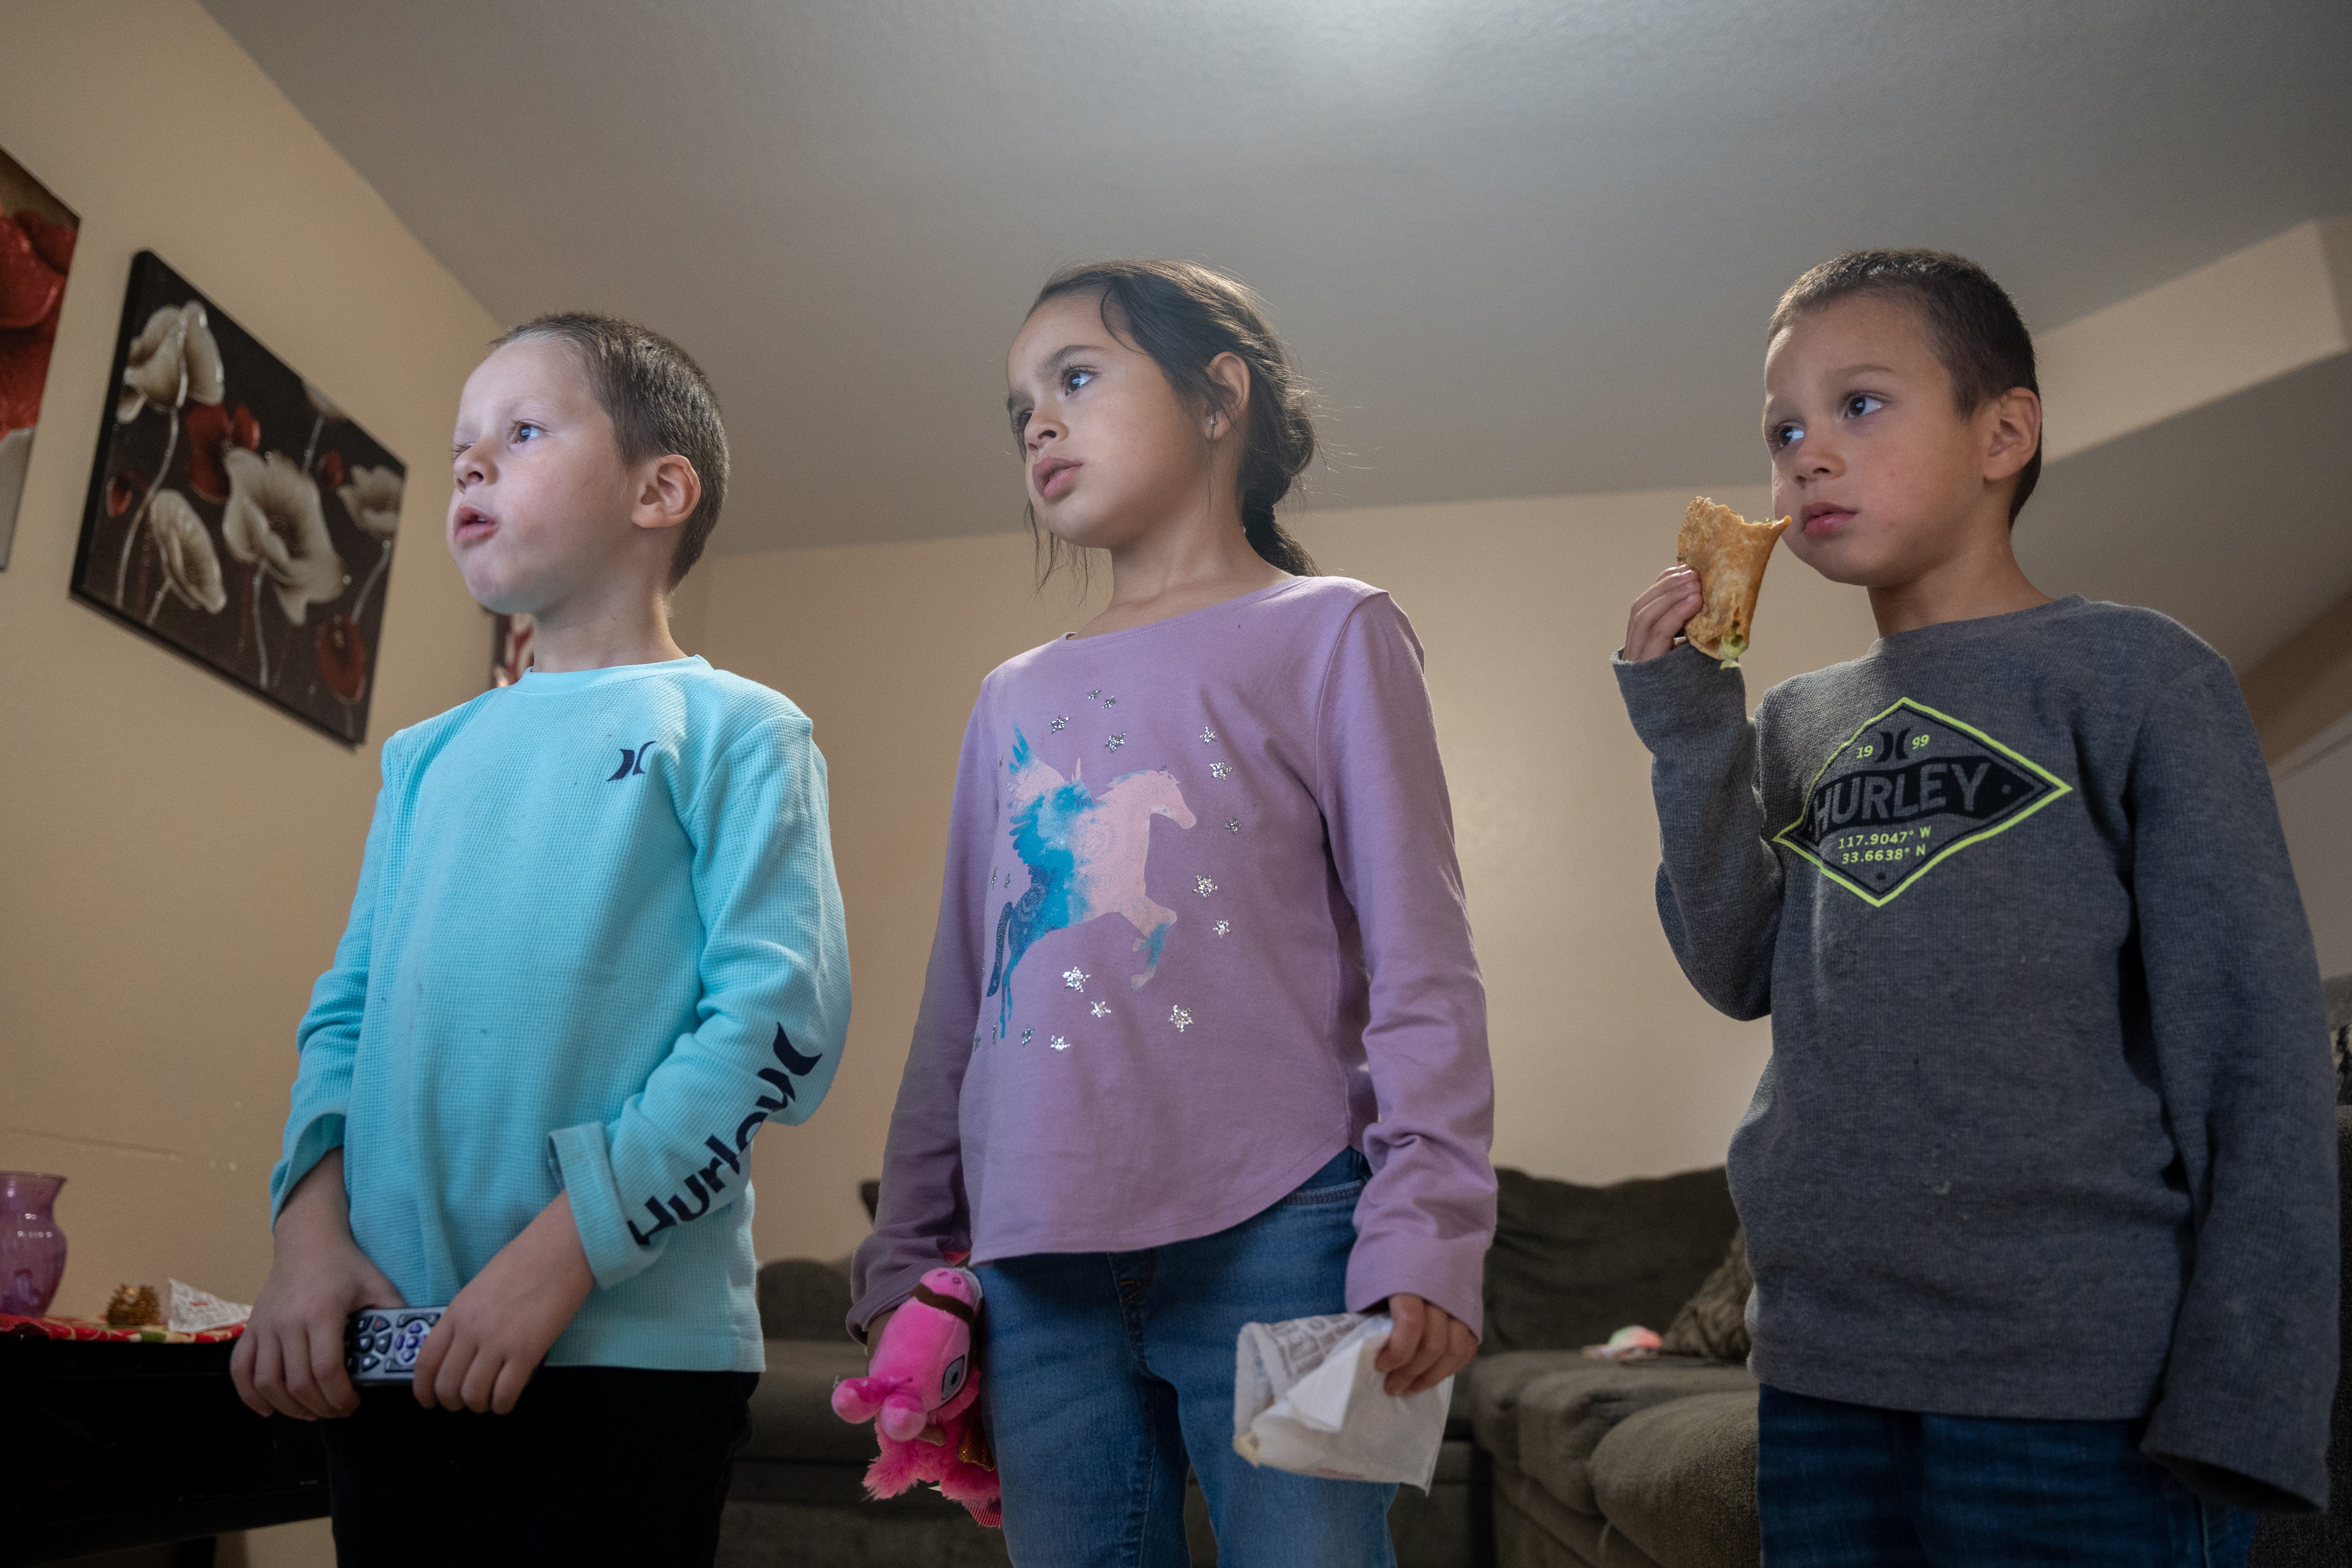 Avier, Alvira, and Adriel Arvizo eat tacos and watch television at their temporary Avondale home on Nov. 18, 2022.